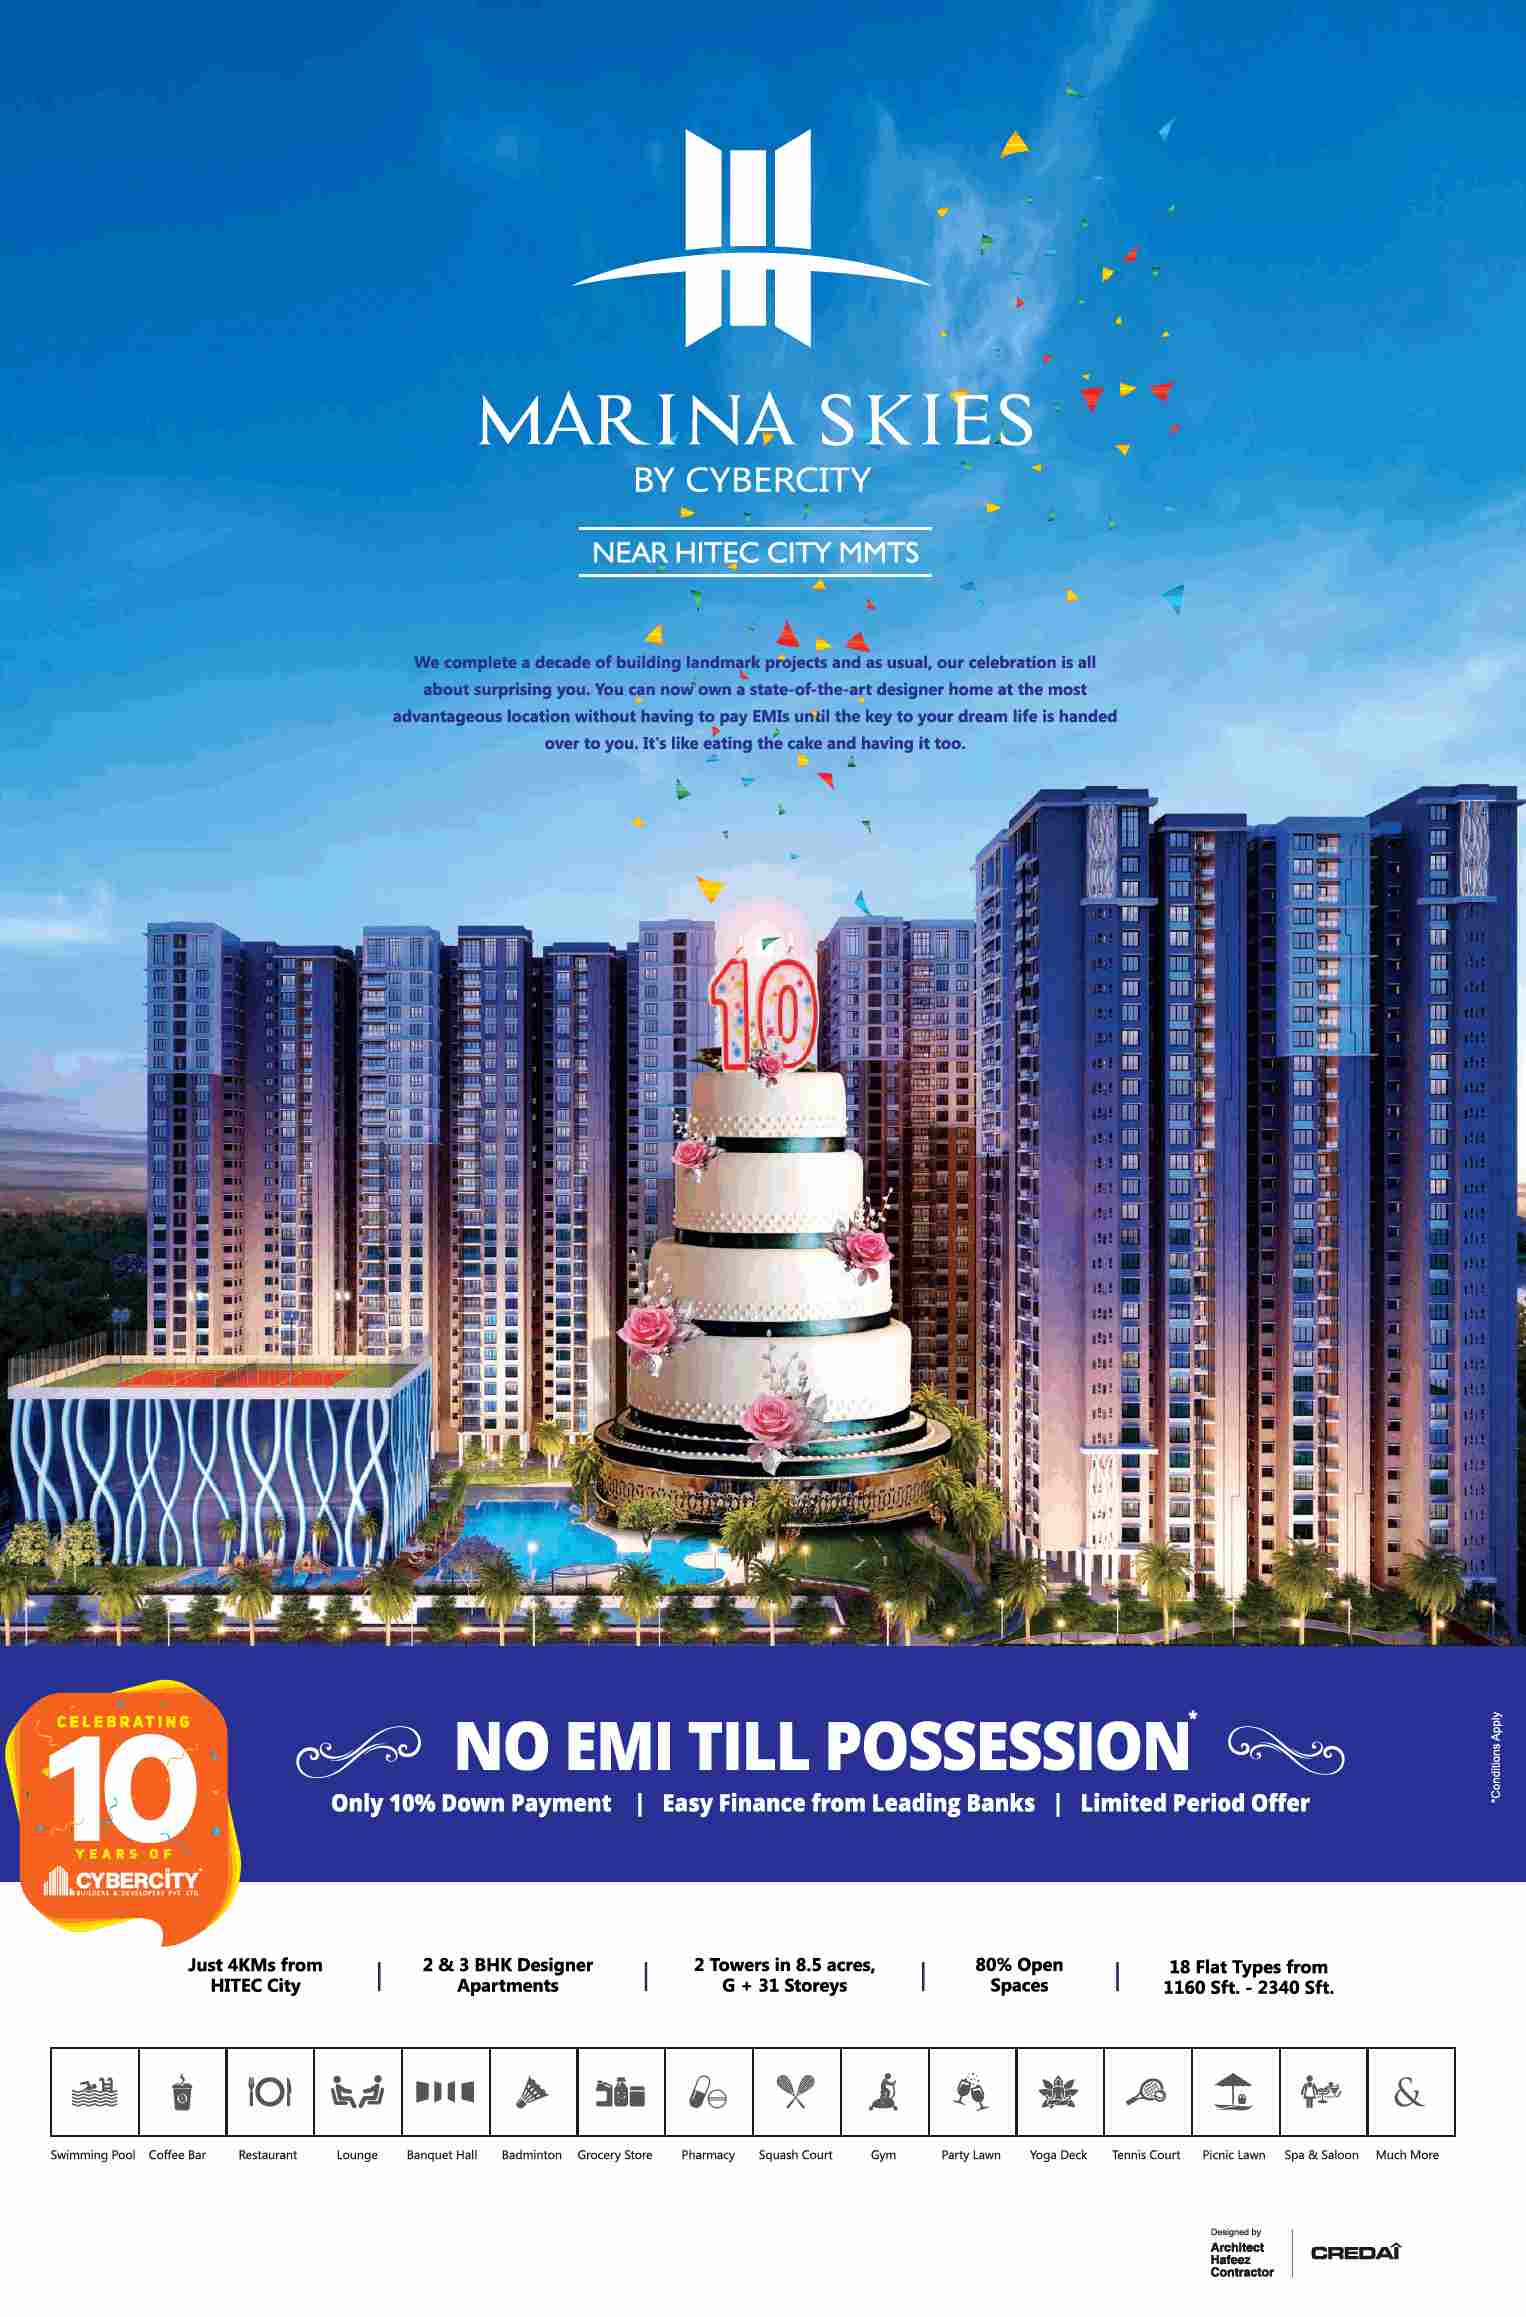 Pay 10% down payment & no EMI till possession at Cybercity Marina Skies in Hyderabad